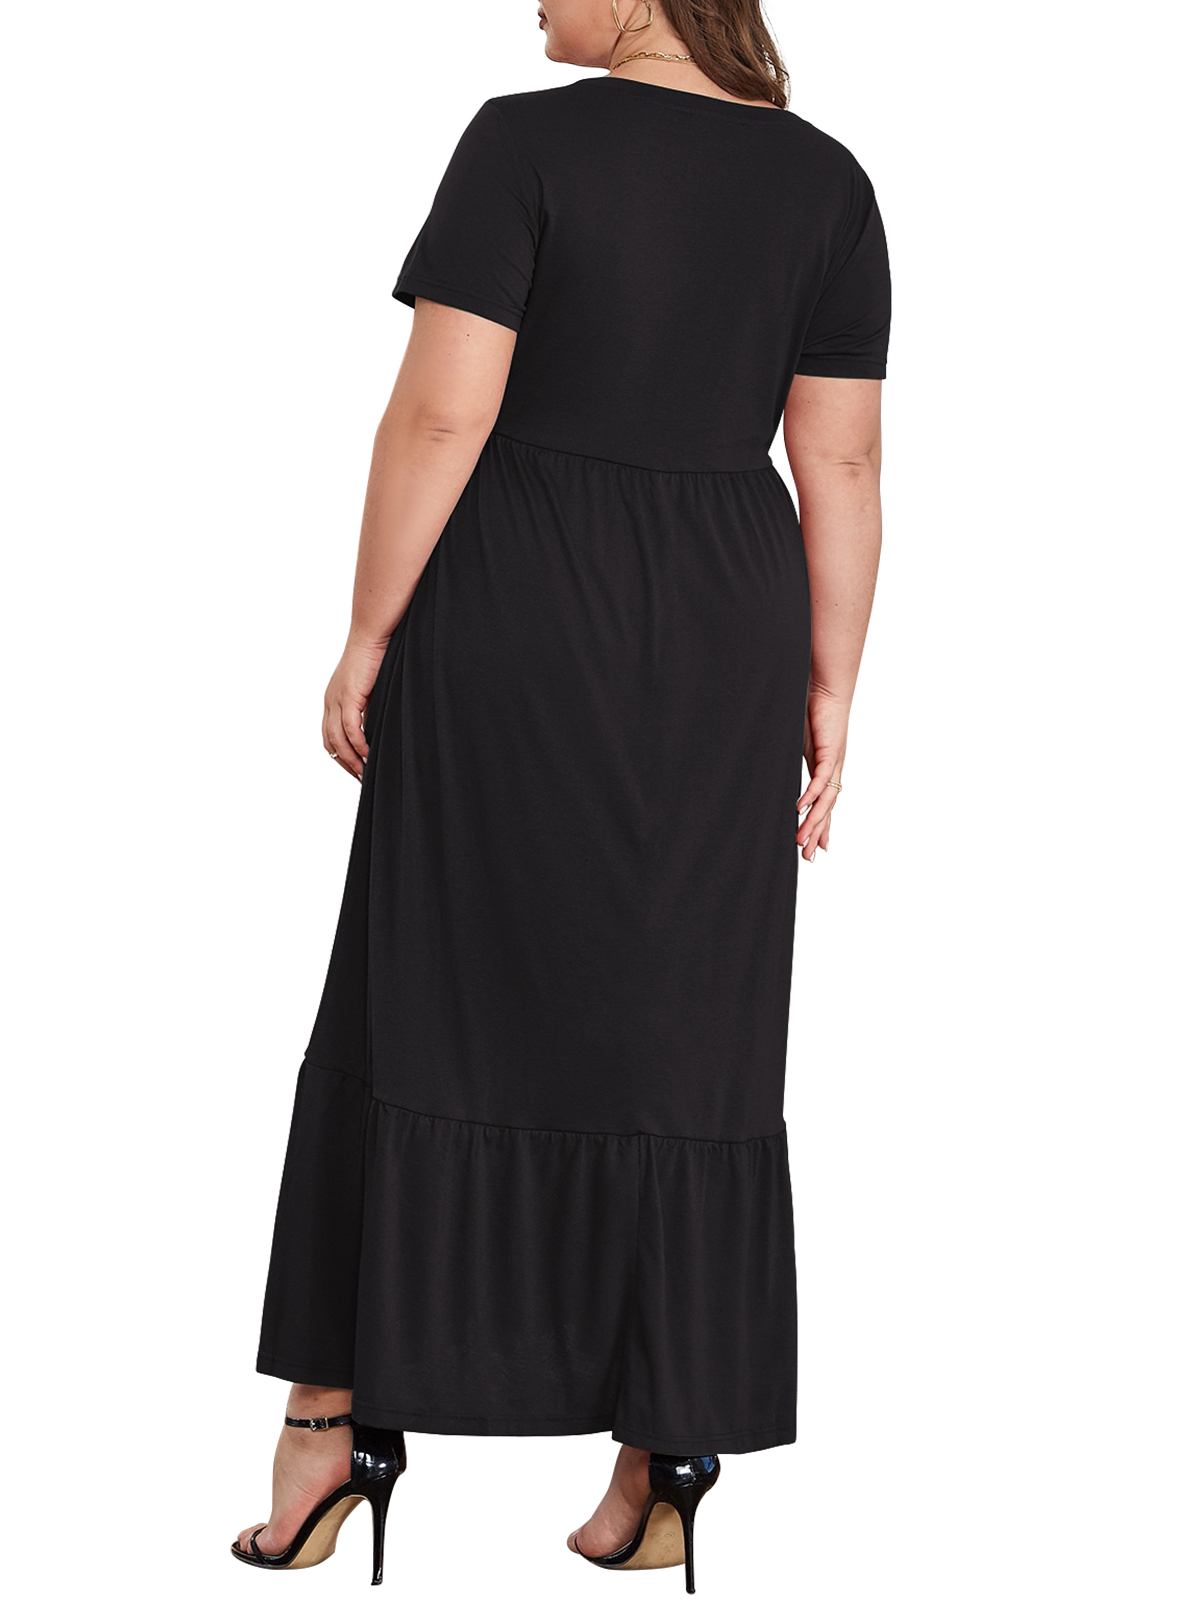 Mengpipi Women's Plus Size Casual Short Sleeve Crewneck Dress Flowy Tiered Loose Maxi Dress with Pockets Black 1X-5X - image 3 of 4